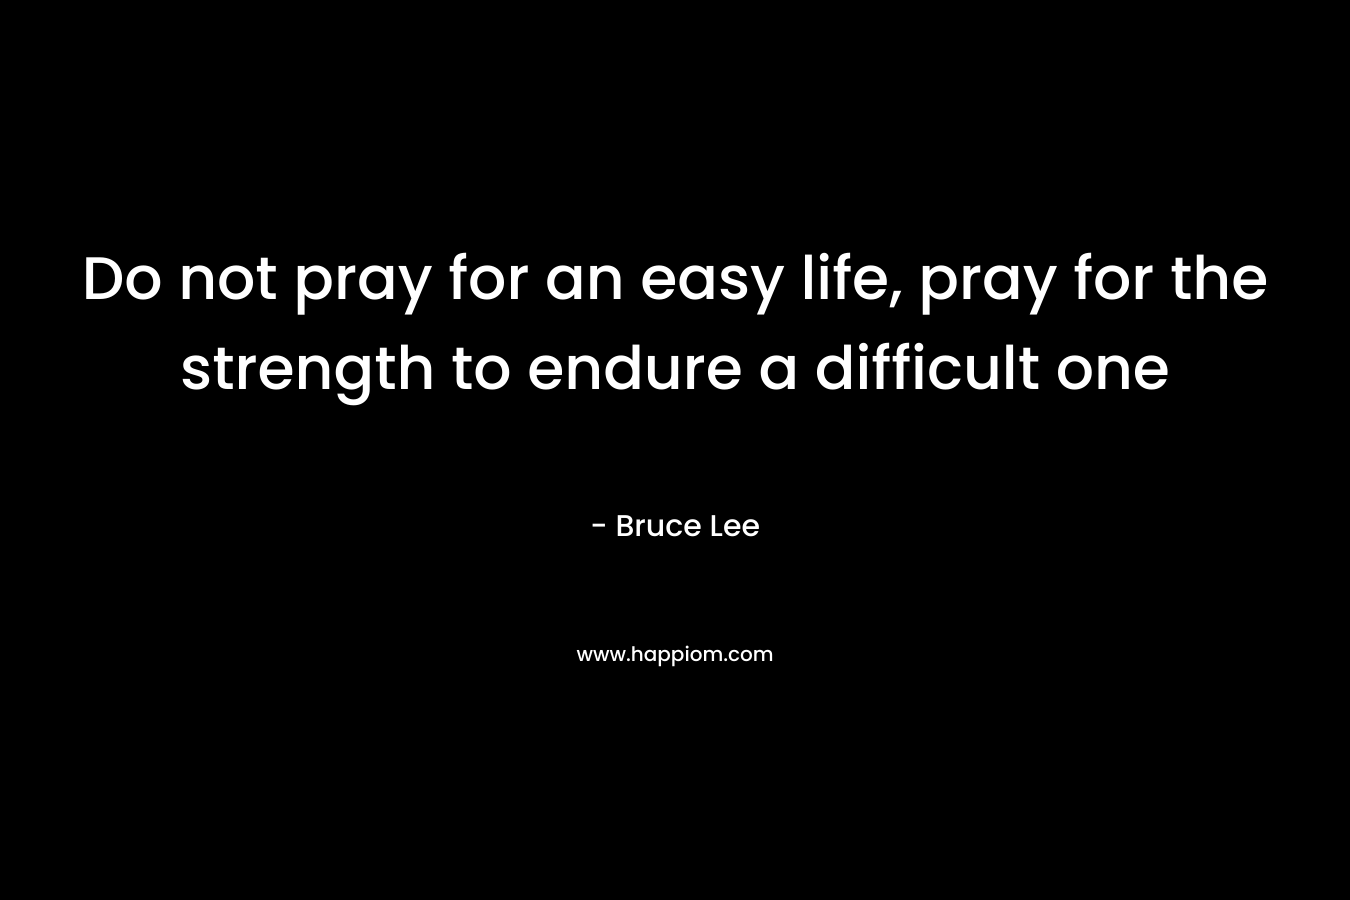 Do not pray for an easy life, pray for the strength to endure a difficult one – Bruce Lee